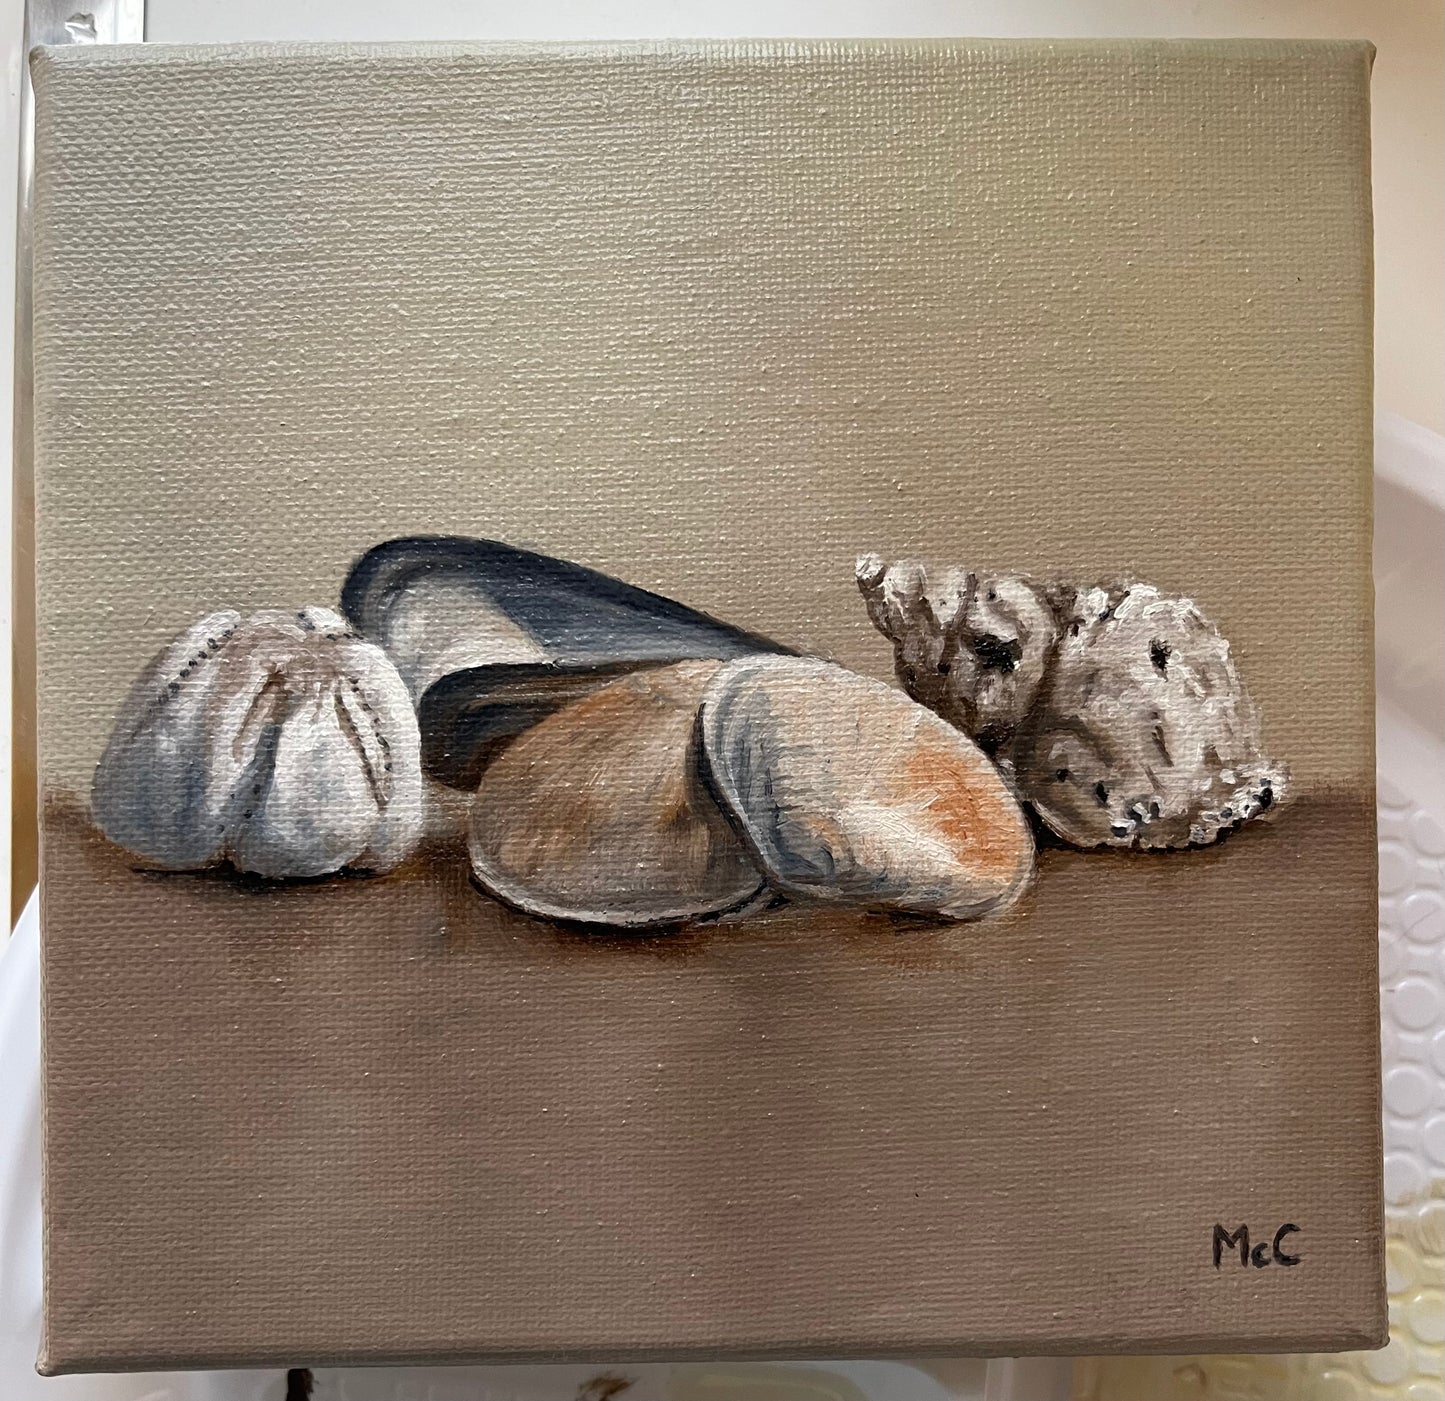 Beach Shells Still Life | Original Oil Painting | 6 x 6 inches with optional frame